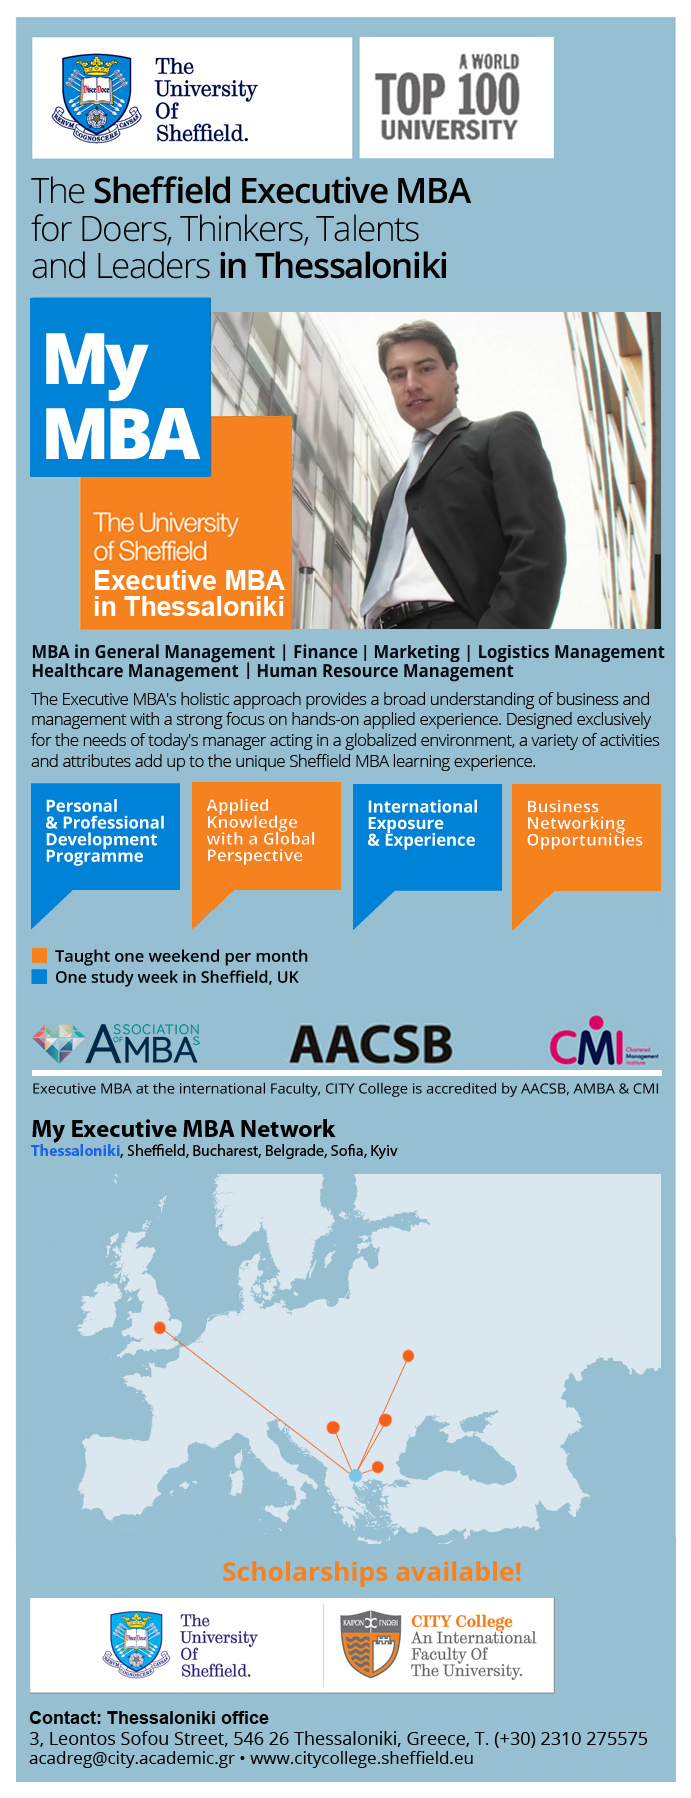 The Sheffield Executive MBA in Thessaloniki